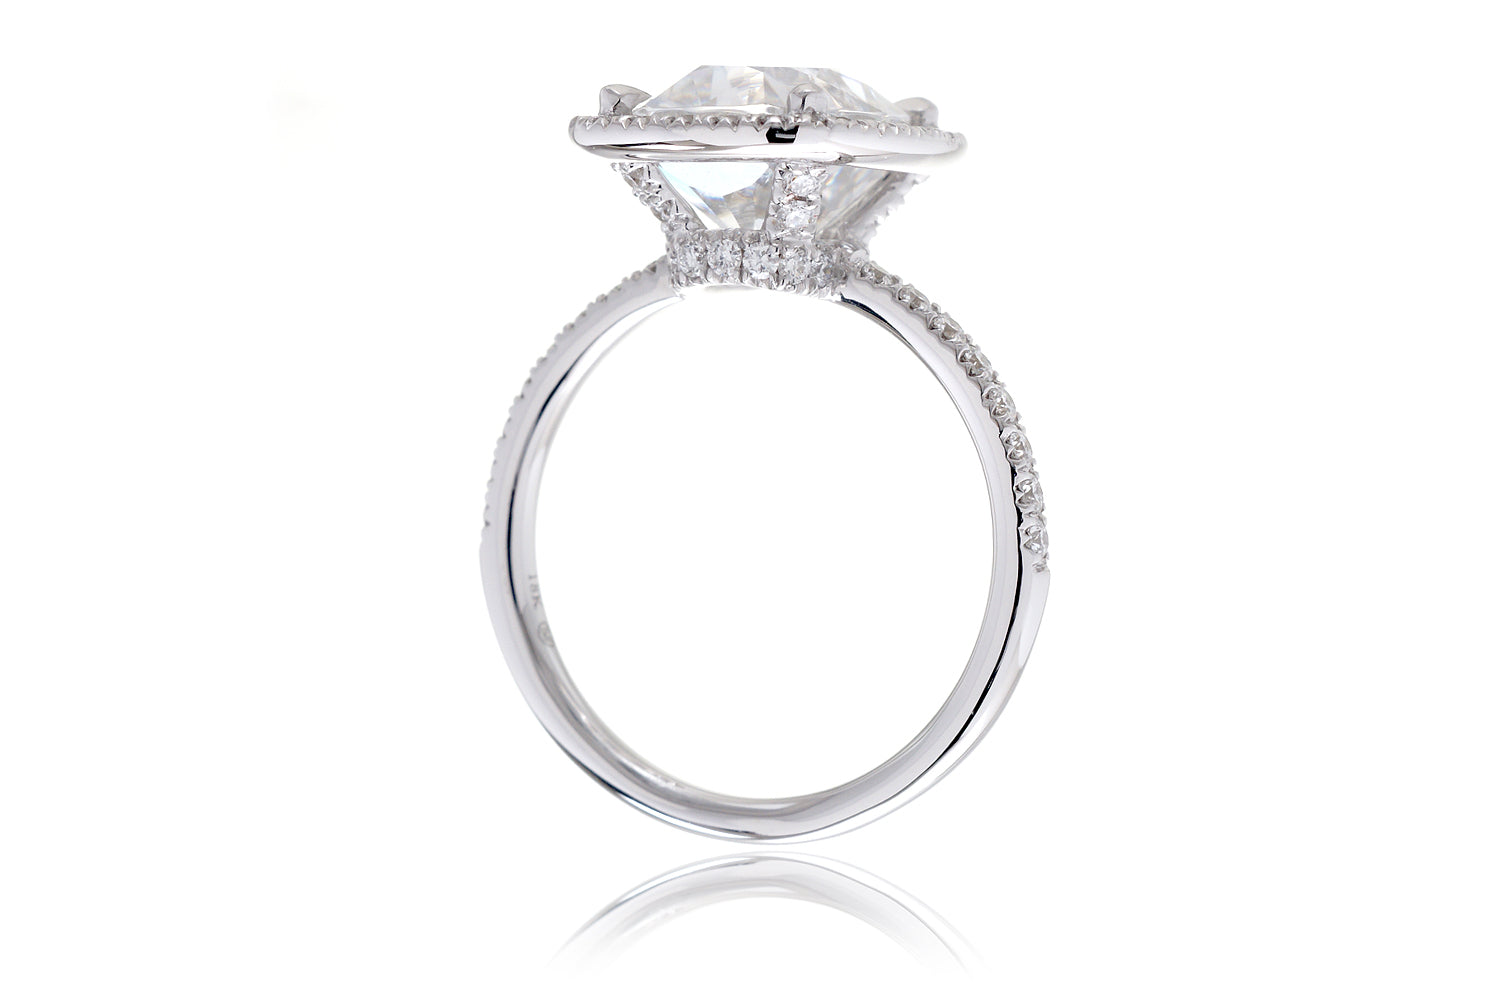 The Drenched Cushion Moissanite